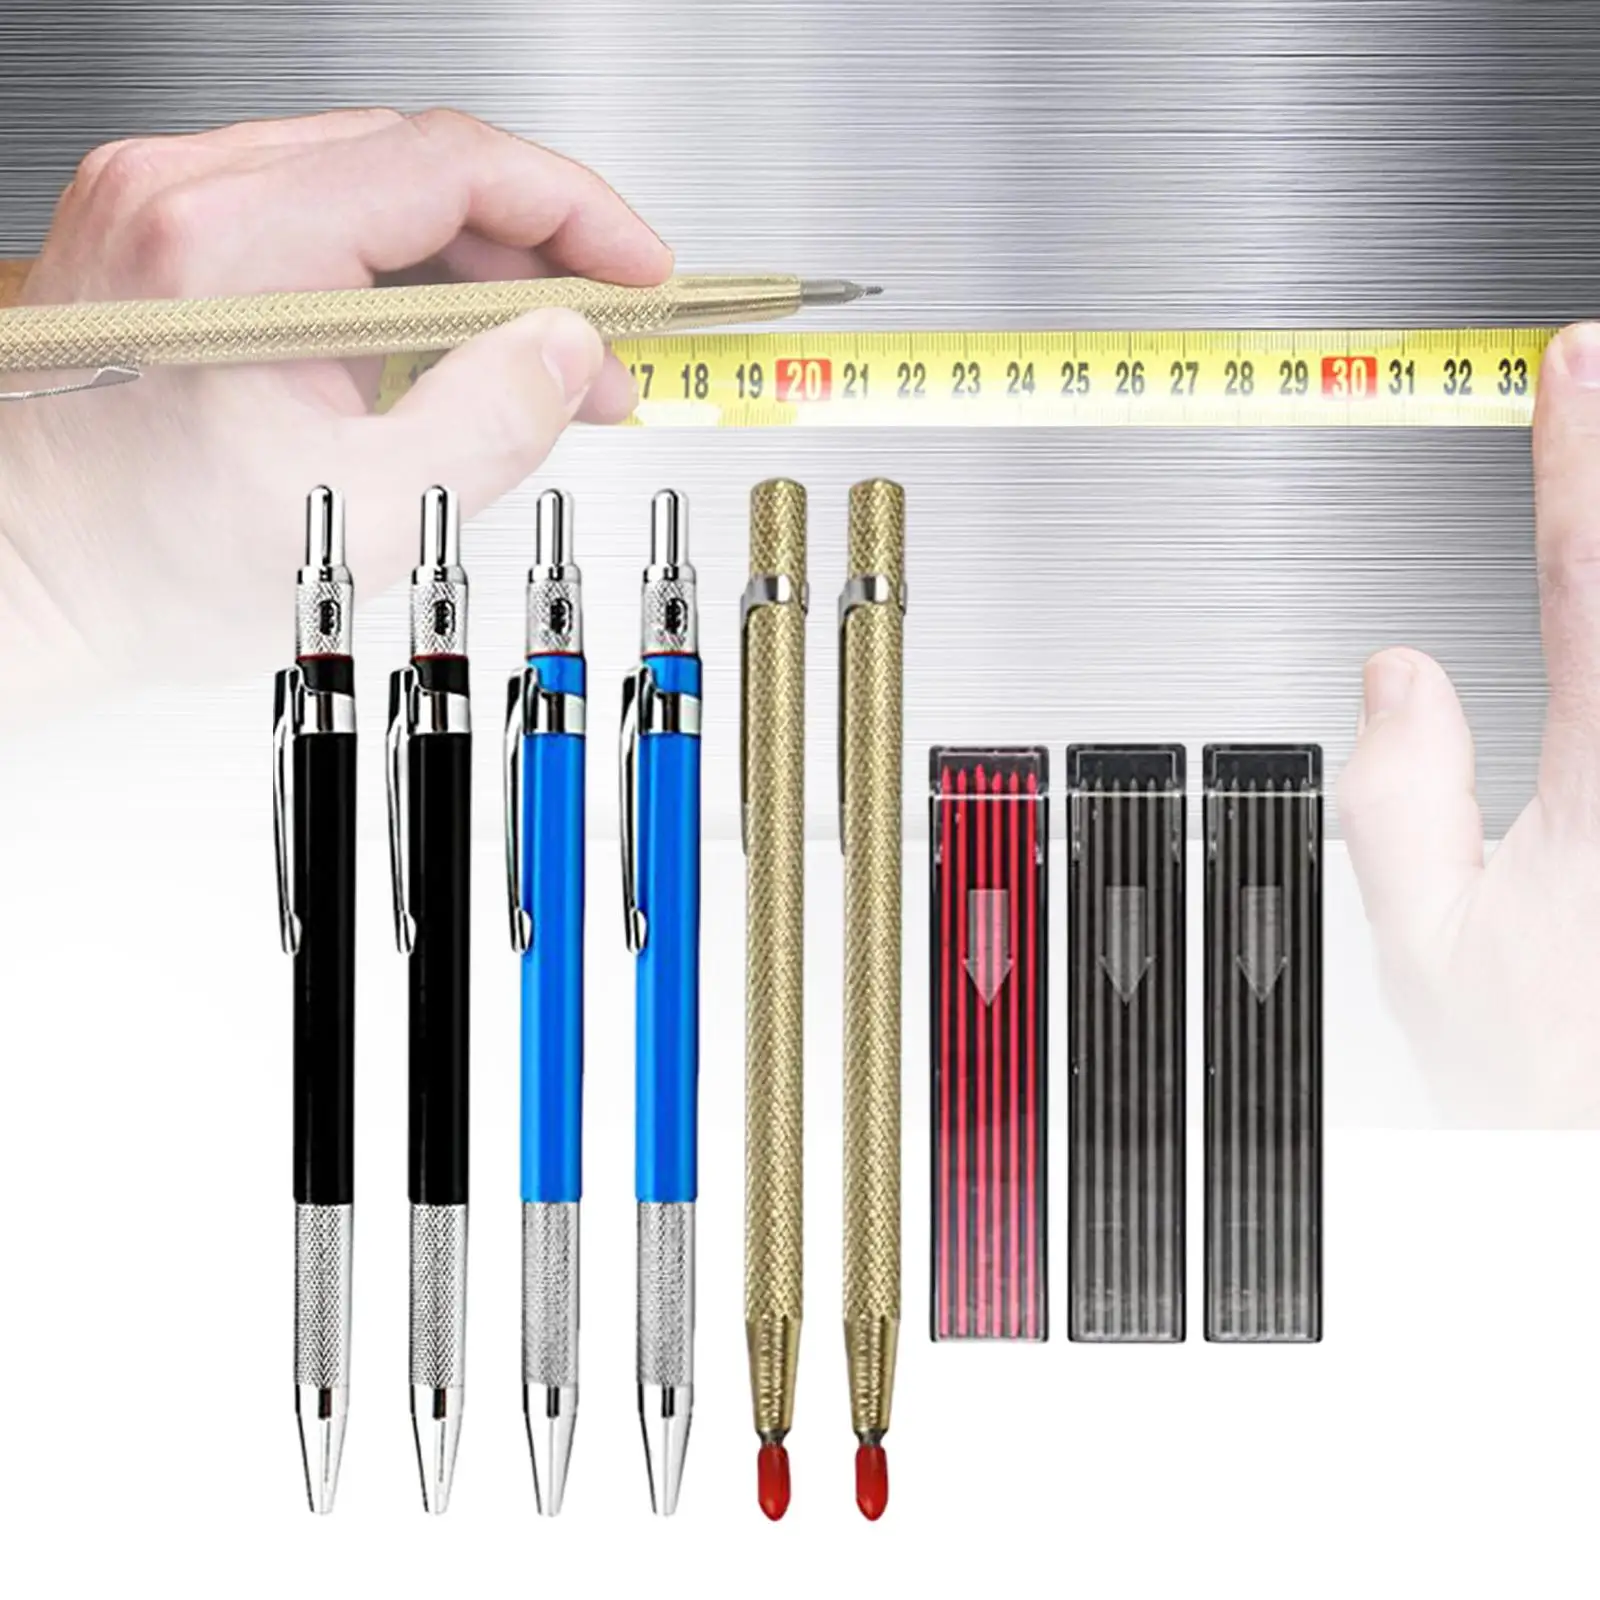 Carpenter Automatic Pencil Set with 36 Refills Leads Marker Set Marking Tool for Architect Scriber Glass Woodworking Ceramics